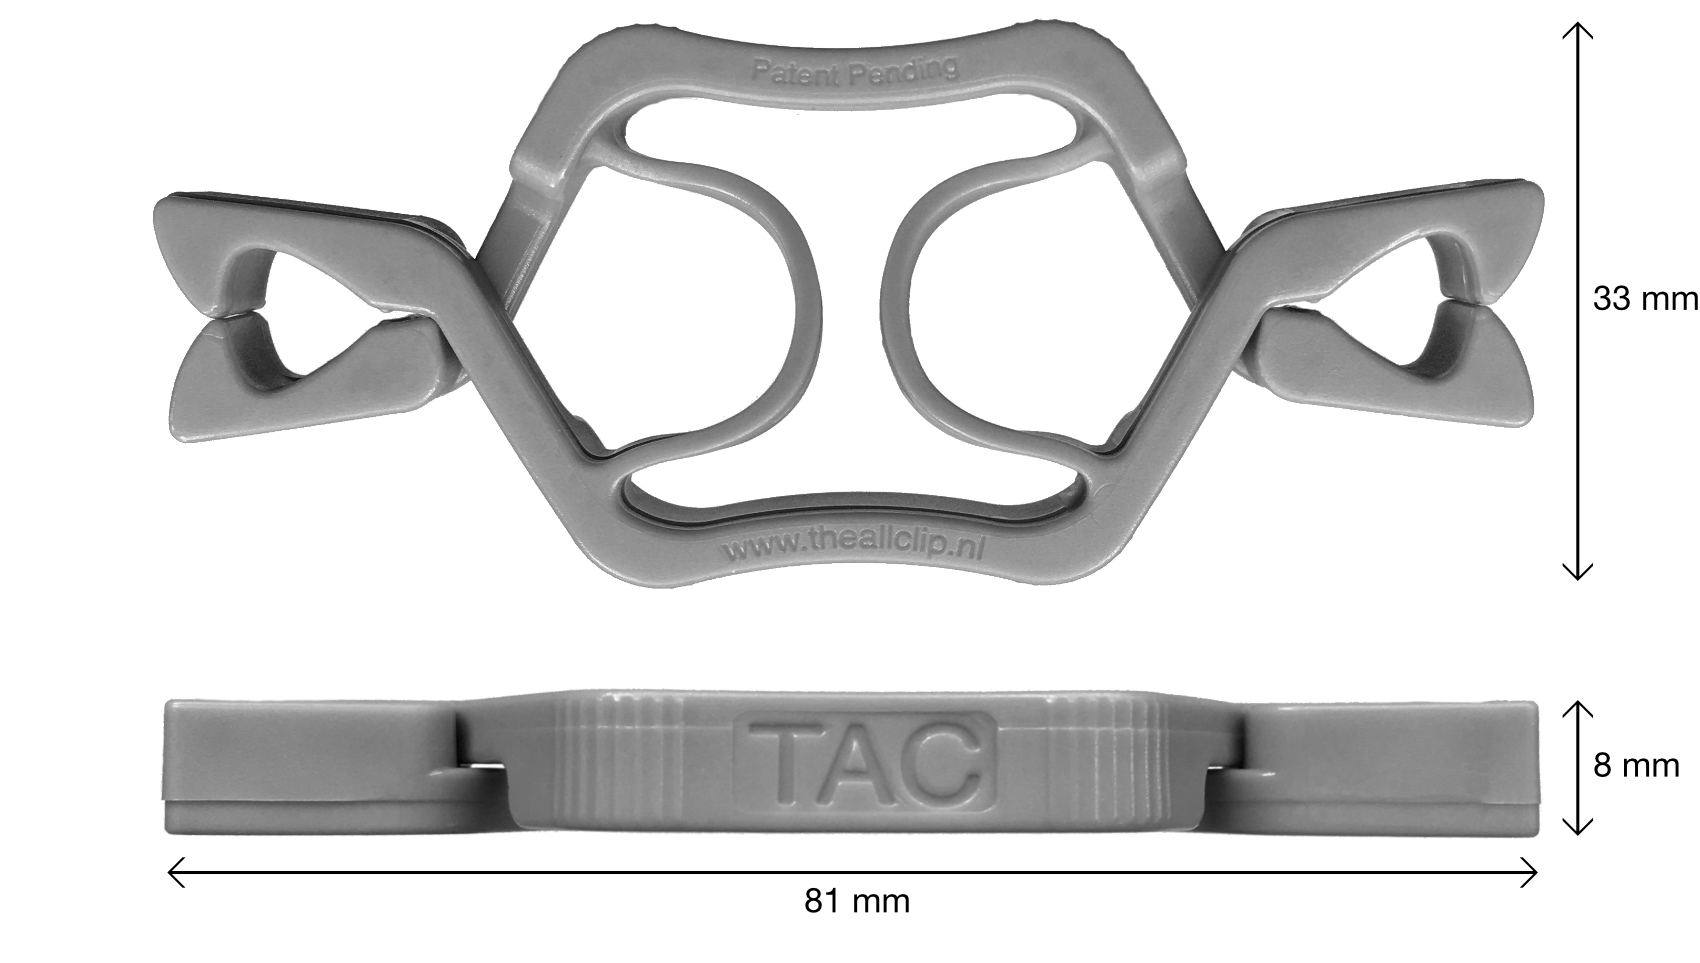 tac top and side view with dimensions